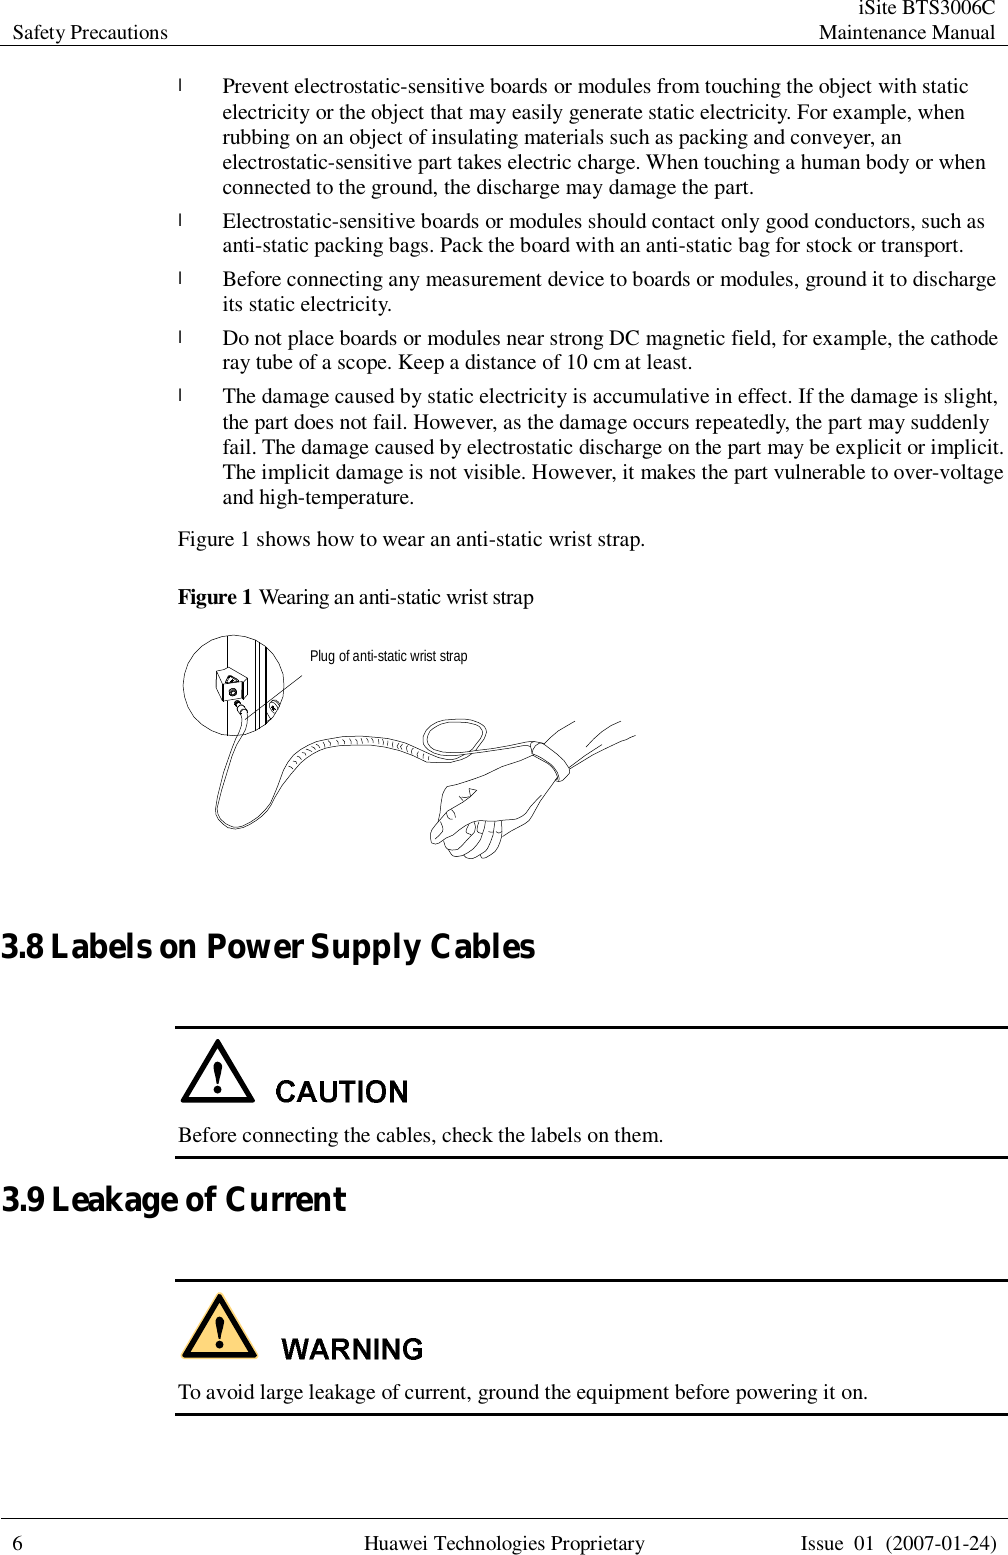 Safety Precautions  iSite BTS3006C Maintenance Manual  6 Huawei Technologies Proprietary Issue 01 (2007-01-24)  l Prevent electrostatic-sensitive boards or modules from touching the object with static electricity or the object that may easily generate static electricity. For example, when rubbing on an object of insulating materials such as packing and conveyer, an electrostatic-sensitive part takes electric charge. When touching a human body or when connected to the ground, the discharge may damage the part. l Electrostatic-sensitive boards or modules should contact only good conductors, such as anti-static packing bags. Pack the board with an anti-static bag for stock or transport. l Before connecting any measurement device to boards or modules, ground it to discharge its static electricity. l Do not place boards or modules near strong DC magnetic field, for example, the cathode ray tube of a scope. Keep a distance of 10 cm at least. l The damage caused by static electricity is accumulative in effect. If the damage is slight, the part does not fail. However, as the damage occurs repeatedly, the part may suddenly fail. The damage caused by electrostatic discharge on the part may be explicit or implicit. The implicit damage is not visible. However, it makes the part vulnerable to over-voltage and high-temperature. Figure 1 shows how to wear an anti-static wrist strap. Figure 1 Wearing an anti-static wrist strap Plug of anti-static wrist strap  3.8 Labels on Power Supply Cables   Before connecting the cables, check the labels on them. 3.9 Leakage of Current    To avoid large leakage of current, ground the equipment before powering it on. 